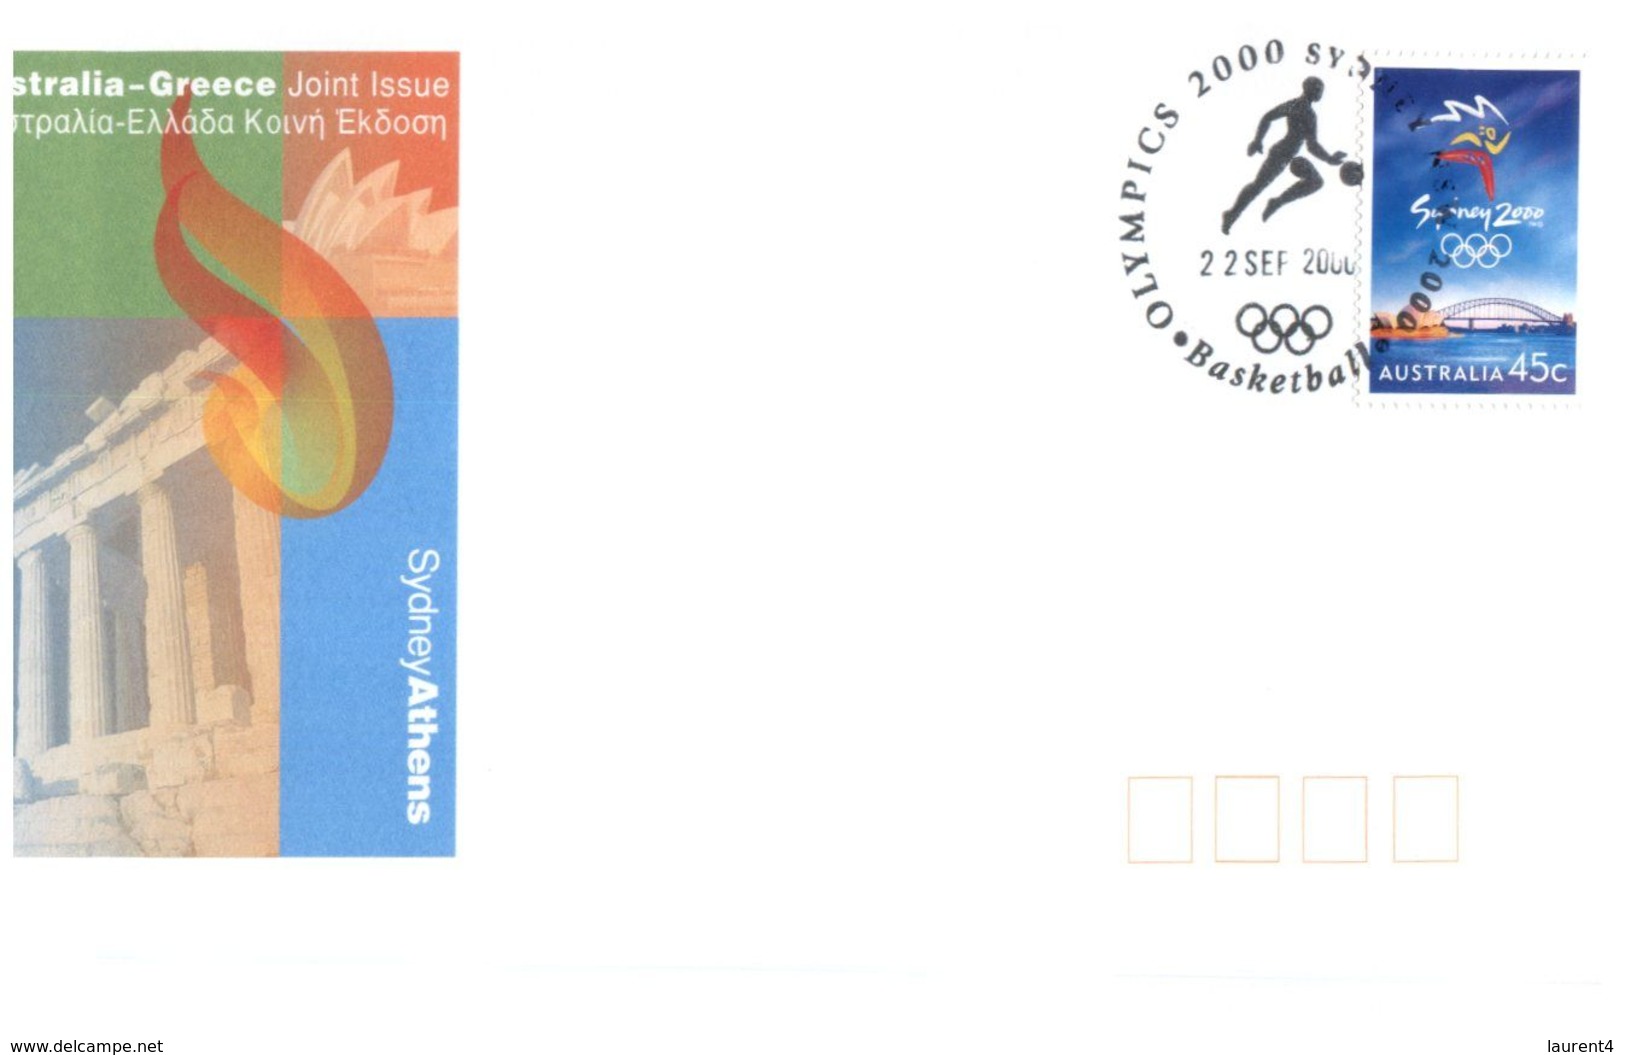 (C 4) Australia - 2000 Olympic Games - set of11 sports cancelled on 22 September 2000